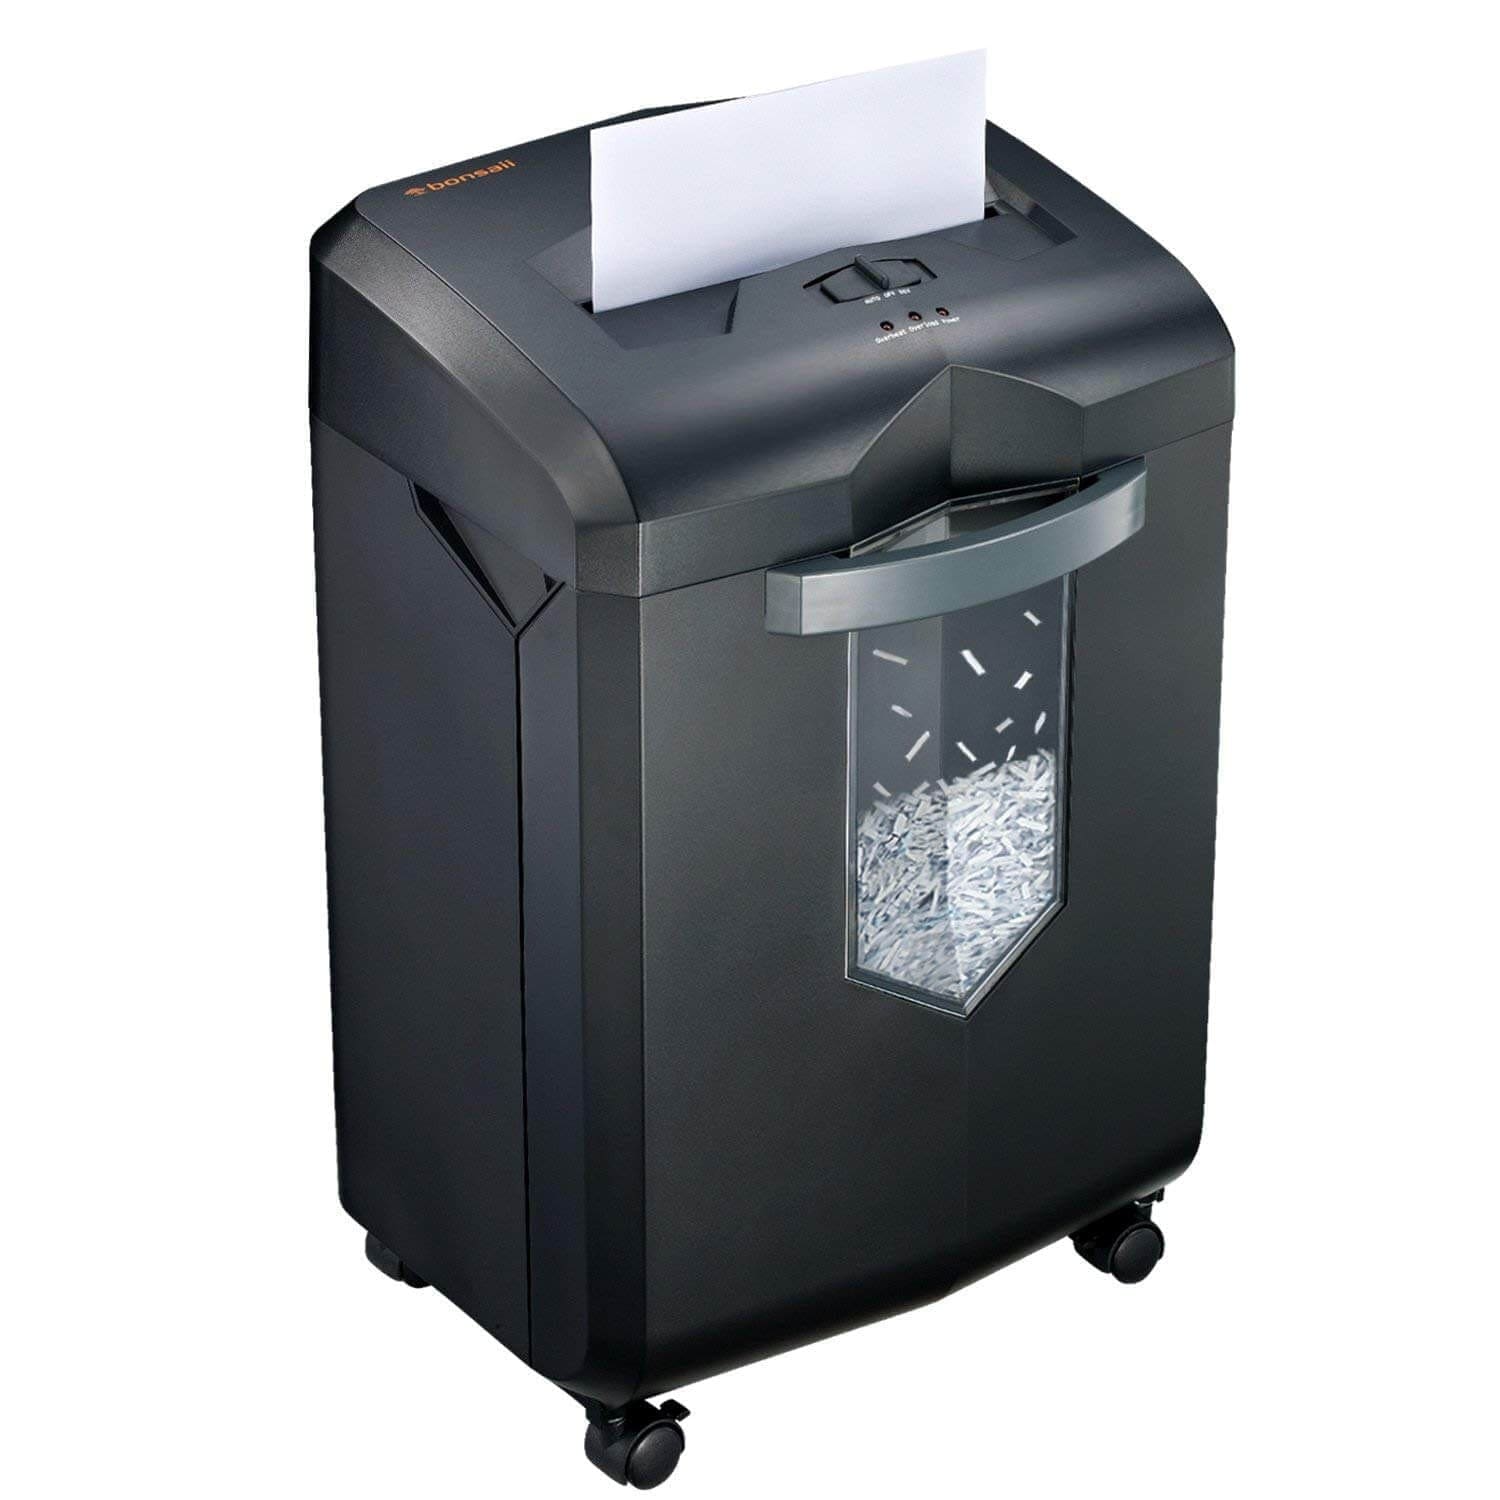 Best Paper Shredders for Home Office (Top 5) 